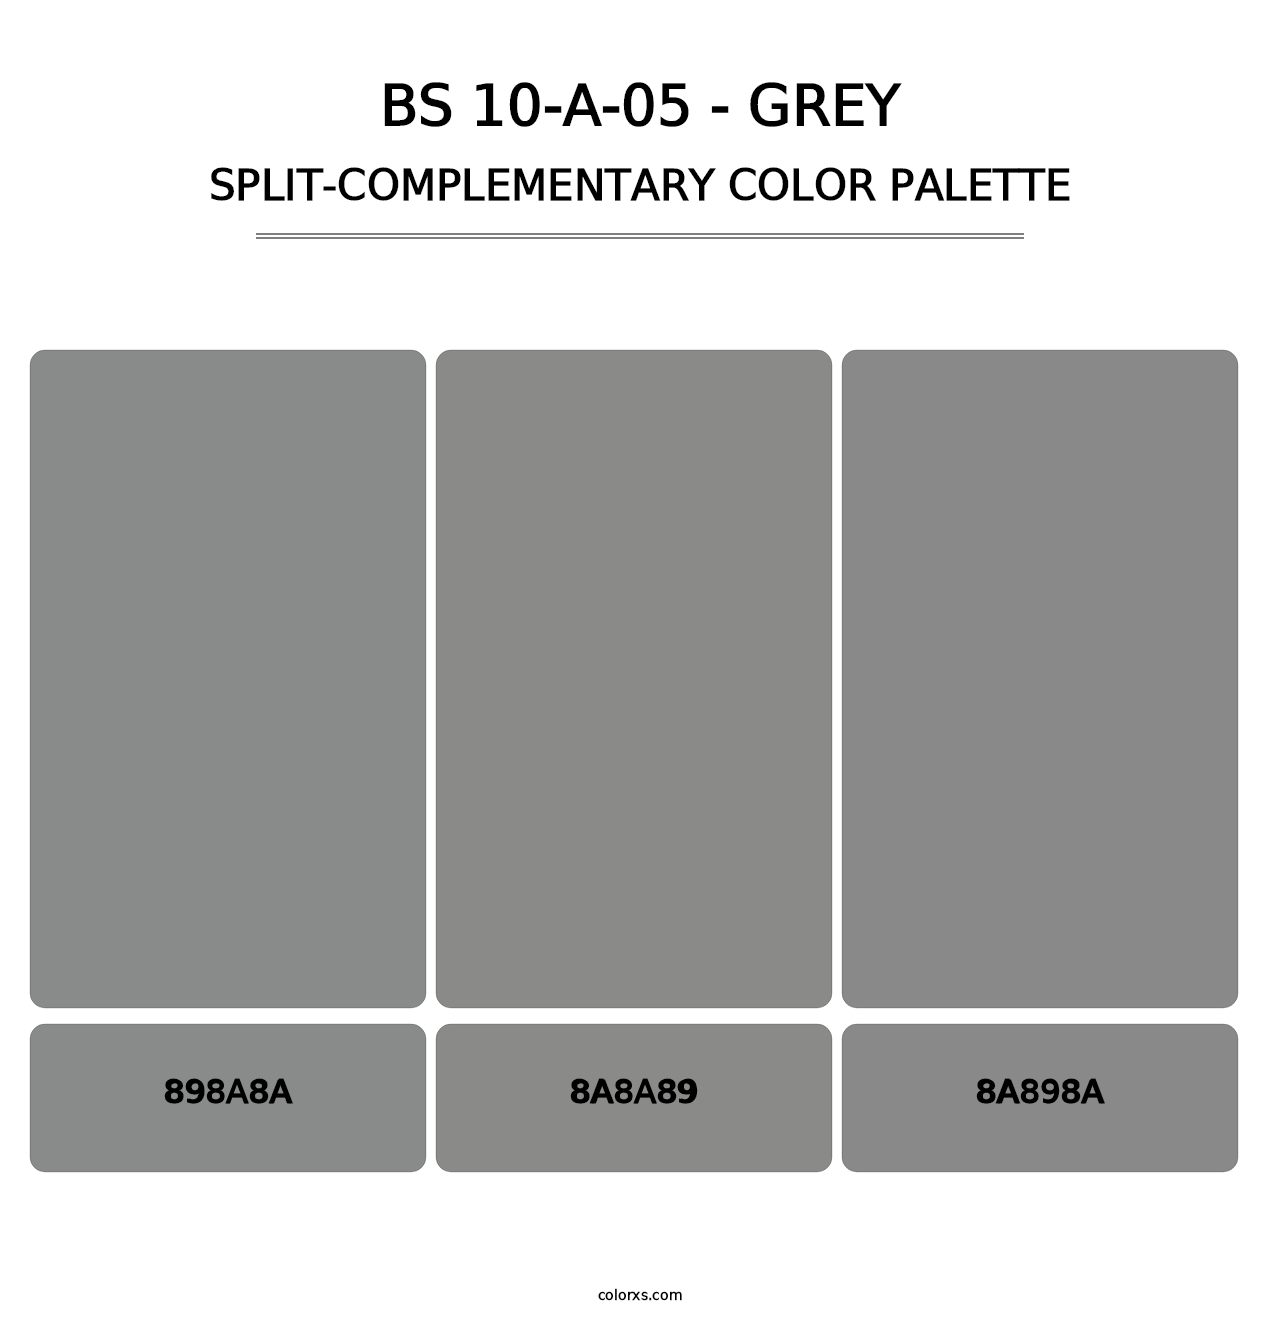 BS 10-A-05 - Grey - Split-Complementary Color Palette